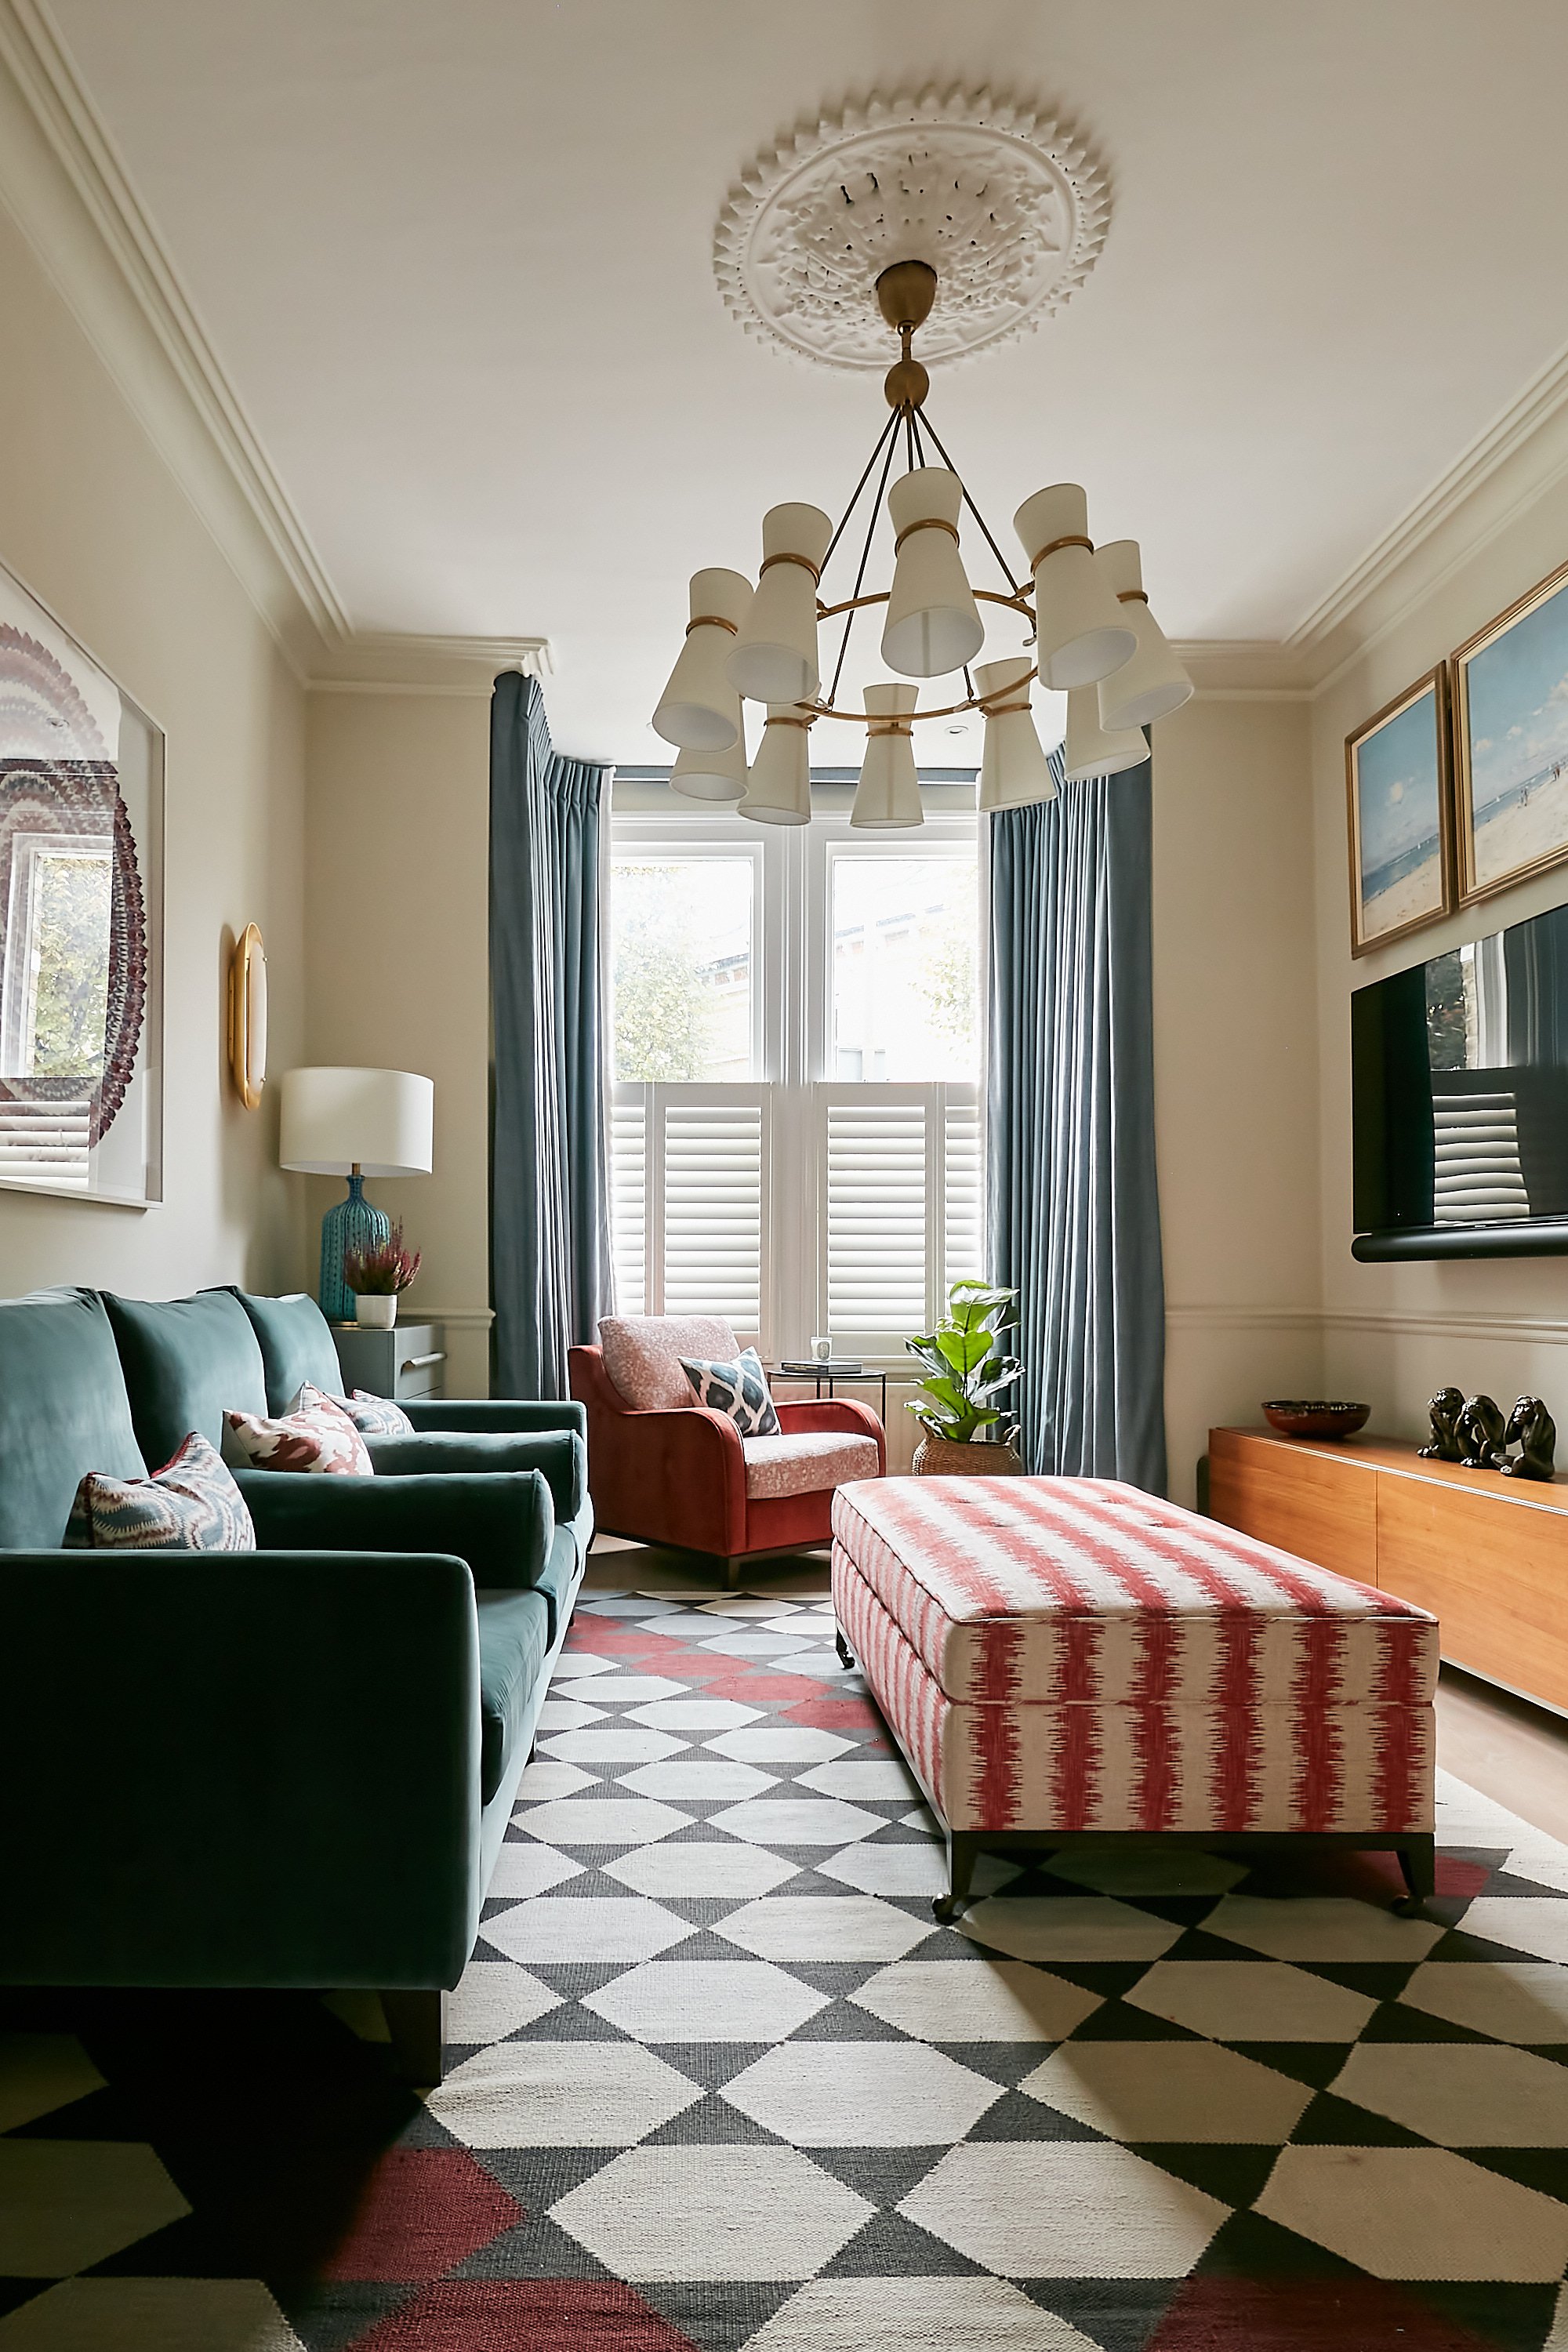 01 FAMILY ROOM WANDSWORTH HOUSE BY HENRY PRIDEAUX.jpg